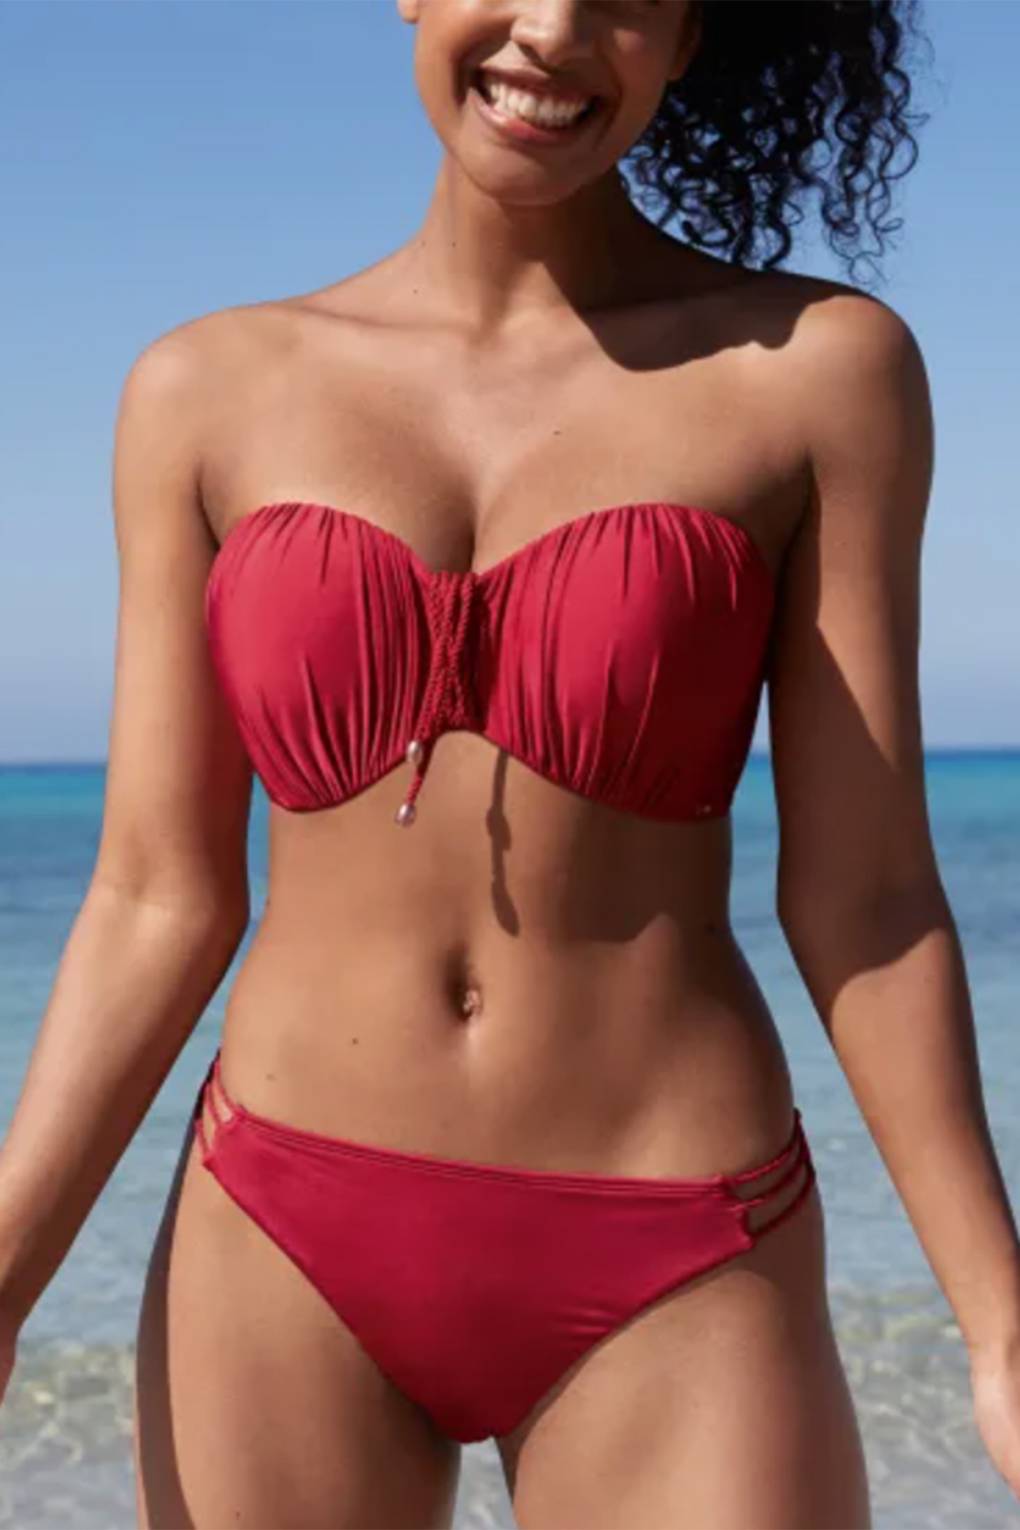 Best Swimwear For Big Busts Bikinis With Support Glamour Uk